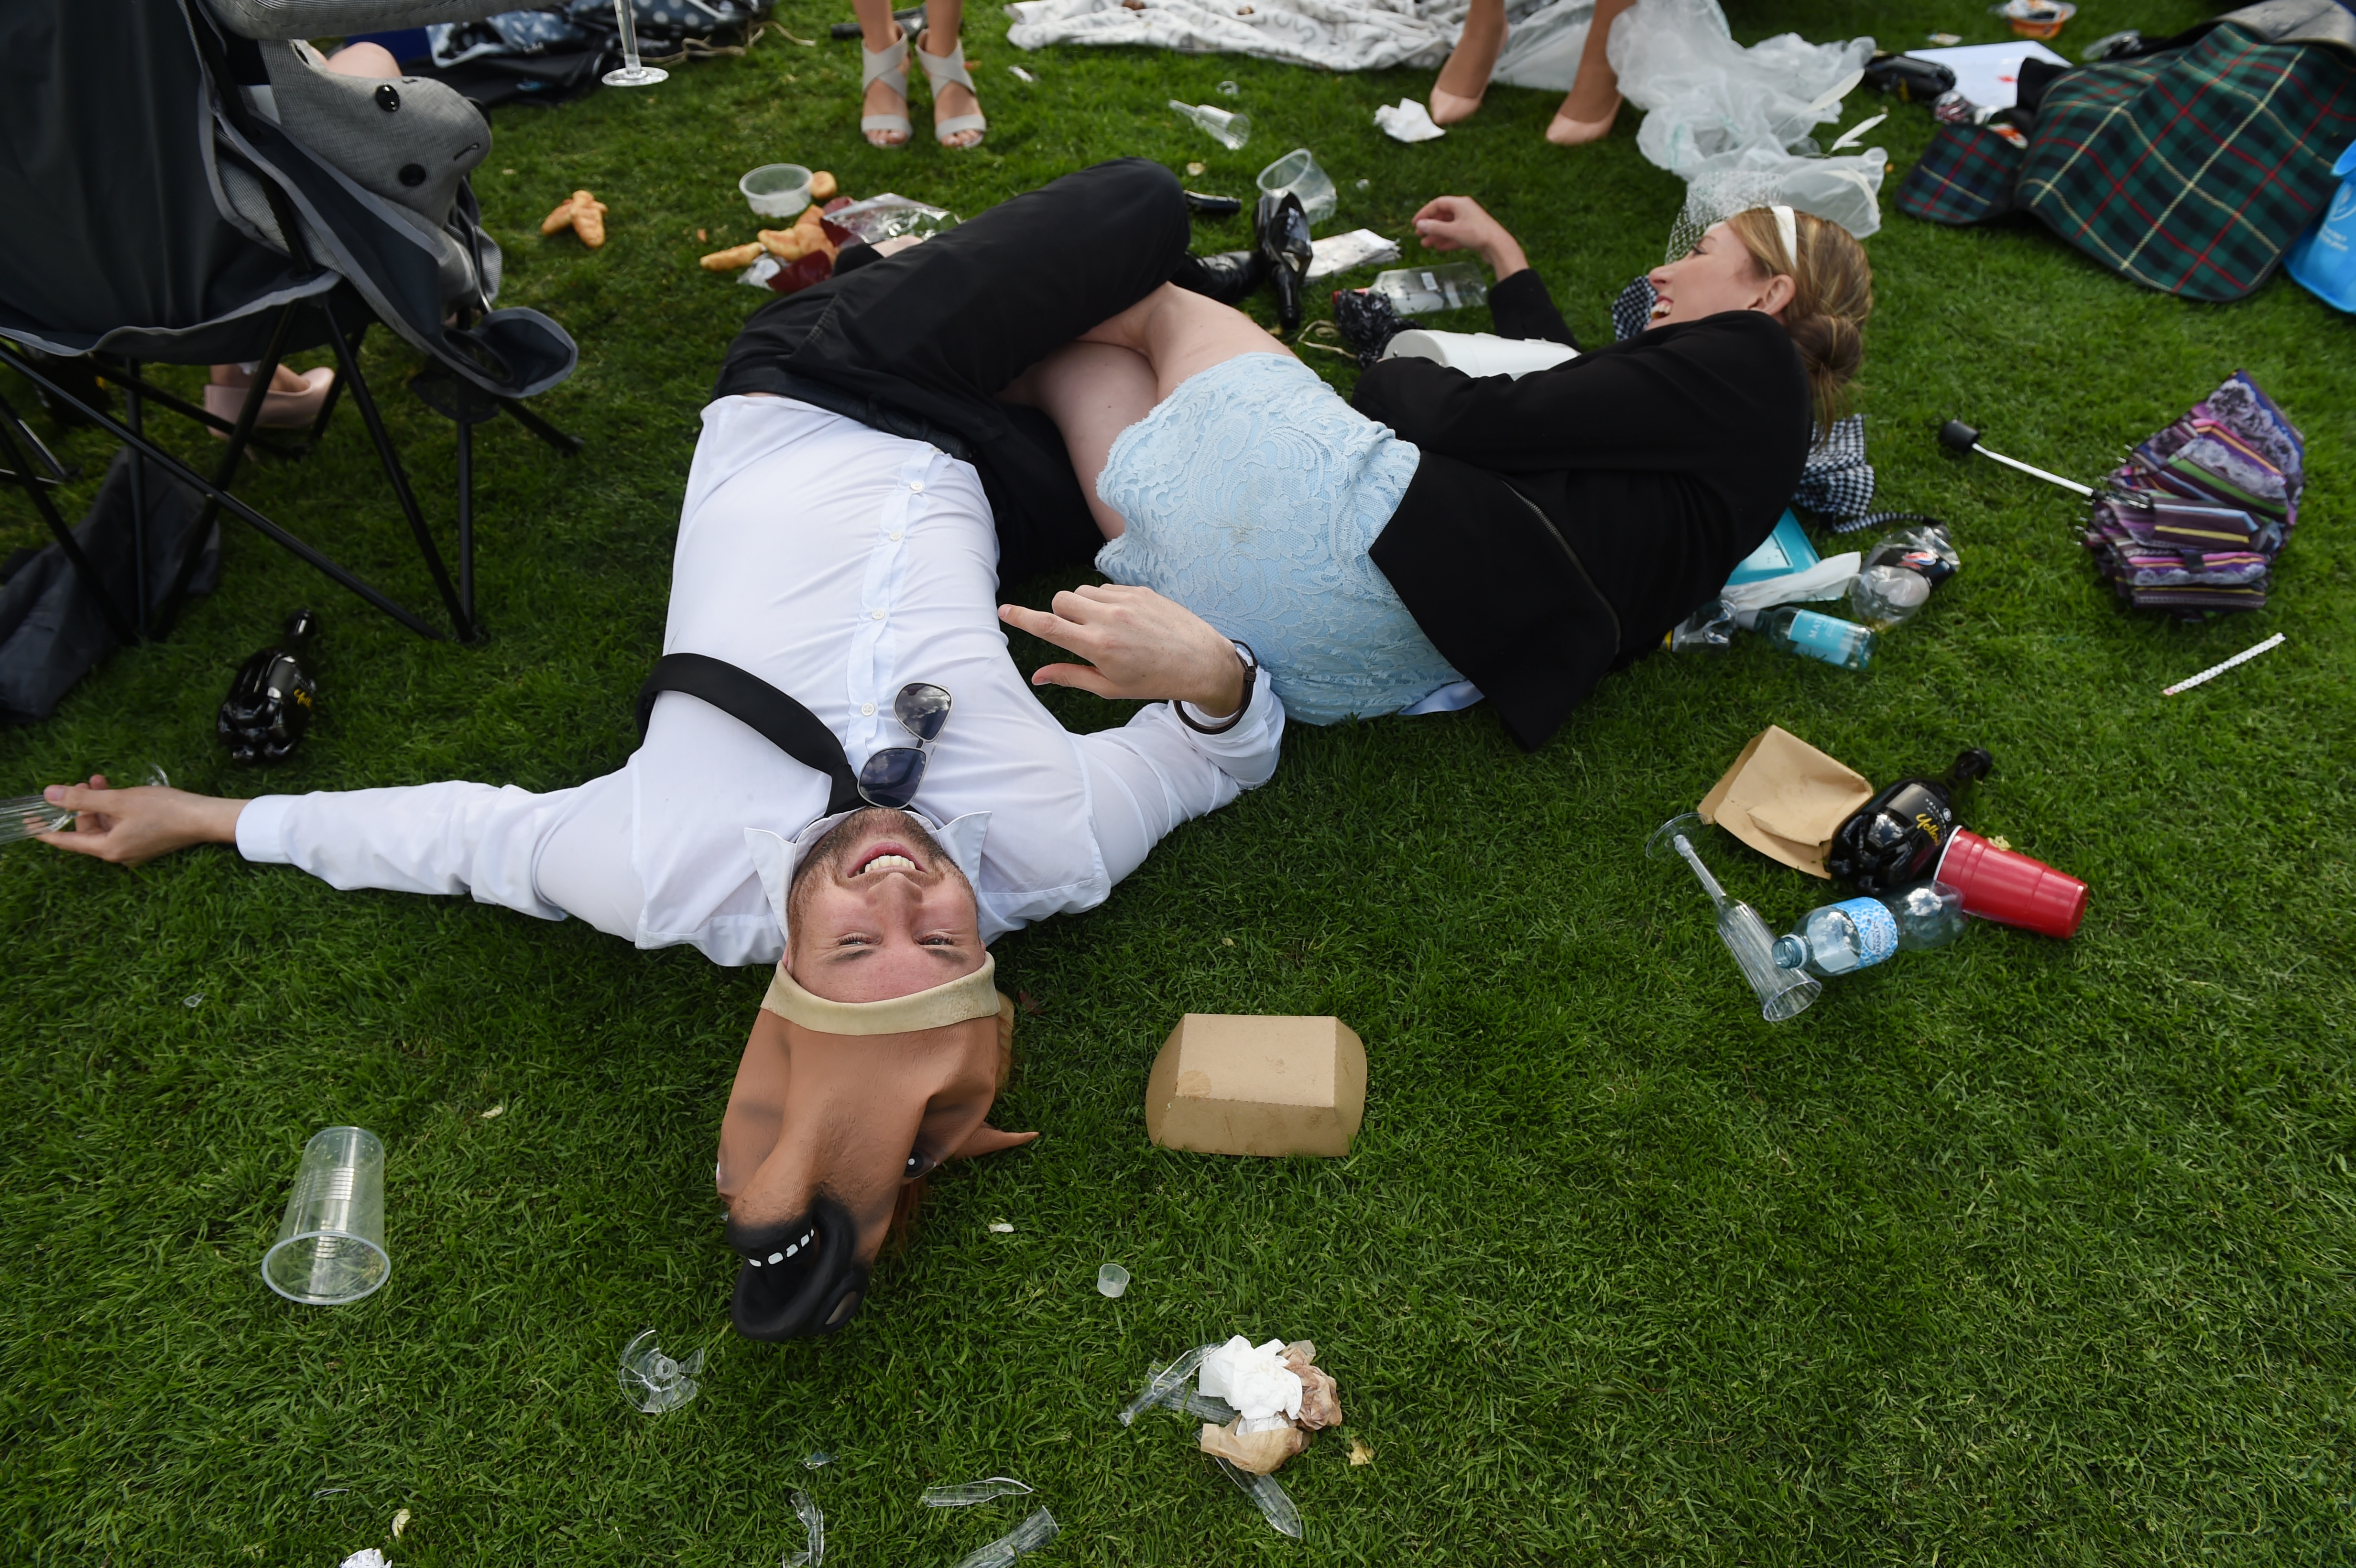 Revellers at the end of Derby Day, part of the Melbourne Cup festival, in 2014.